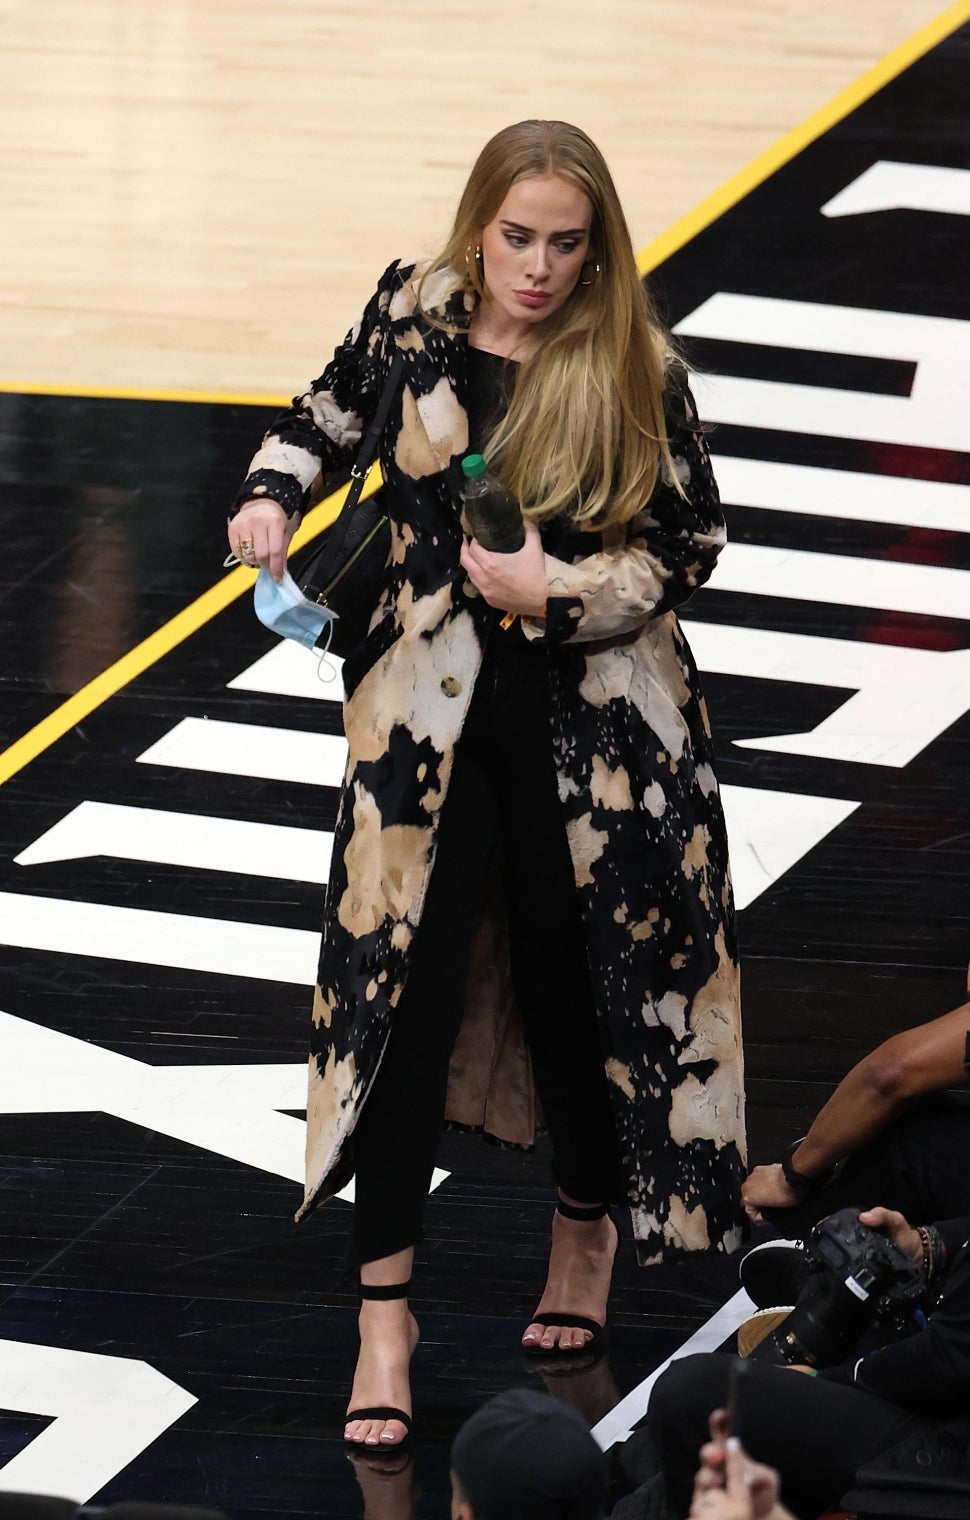 Singer Adele looks walks in during the second half in Game Five of the NBA Finals between the Milwaukee Bucks and the Phoenix Suns at Footprint Center on July 17, 2021 in Phoenix, Arizona.